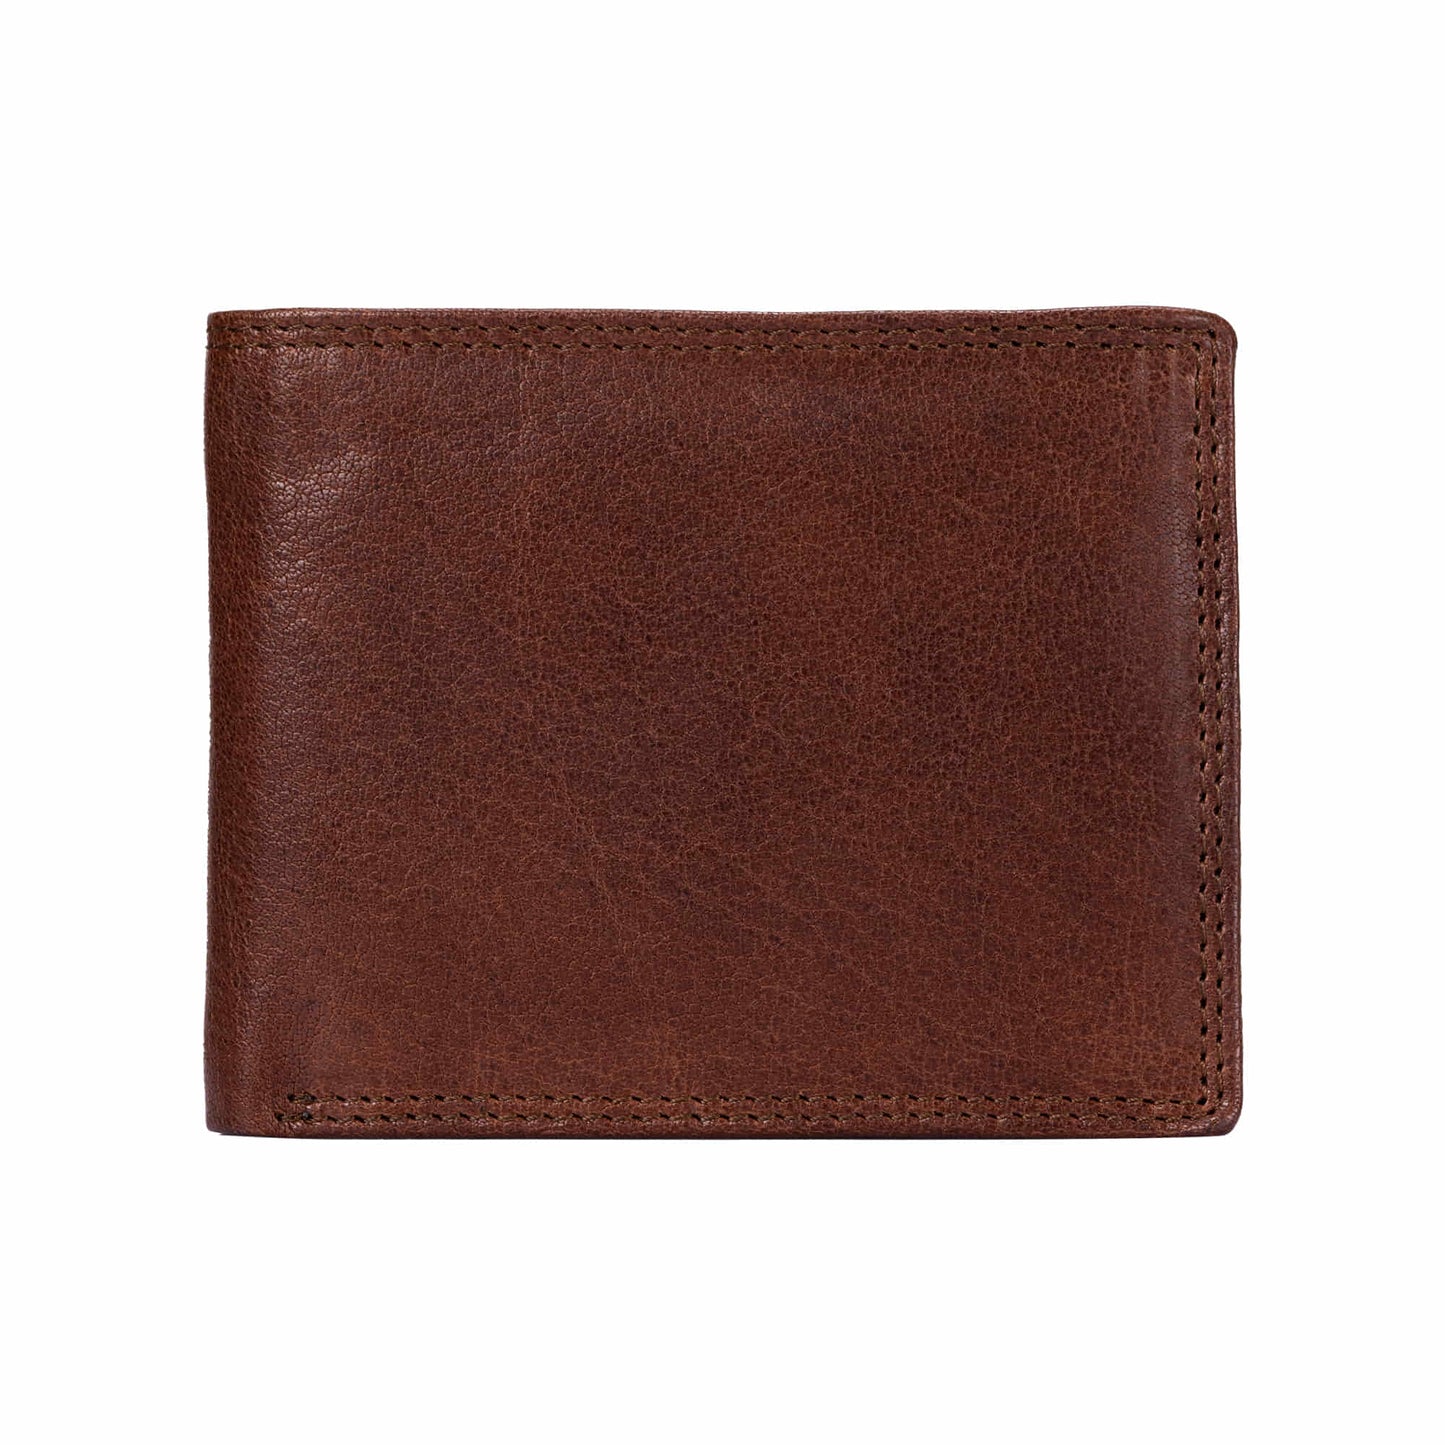 Style n Craft 301766 bifold wallet with side flap in dark brown color vintage leather with 2 tone effect - front closed view